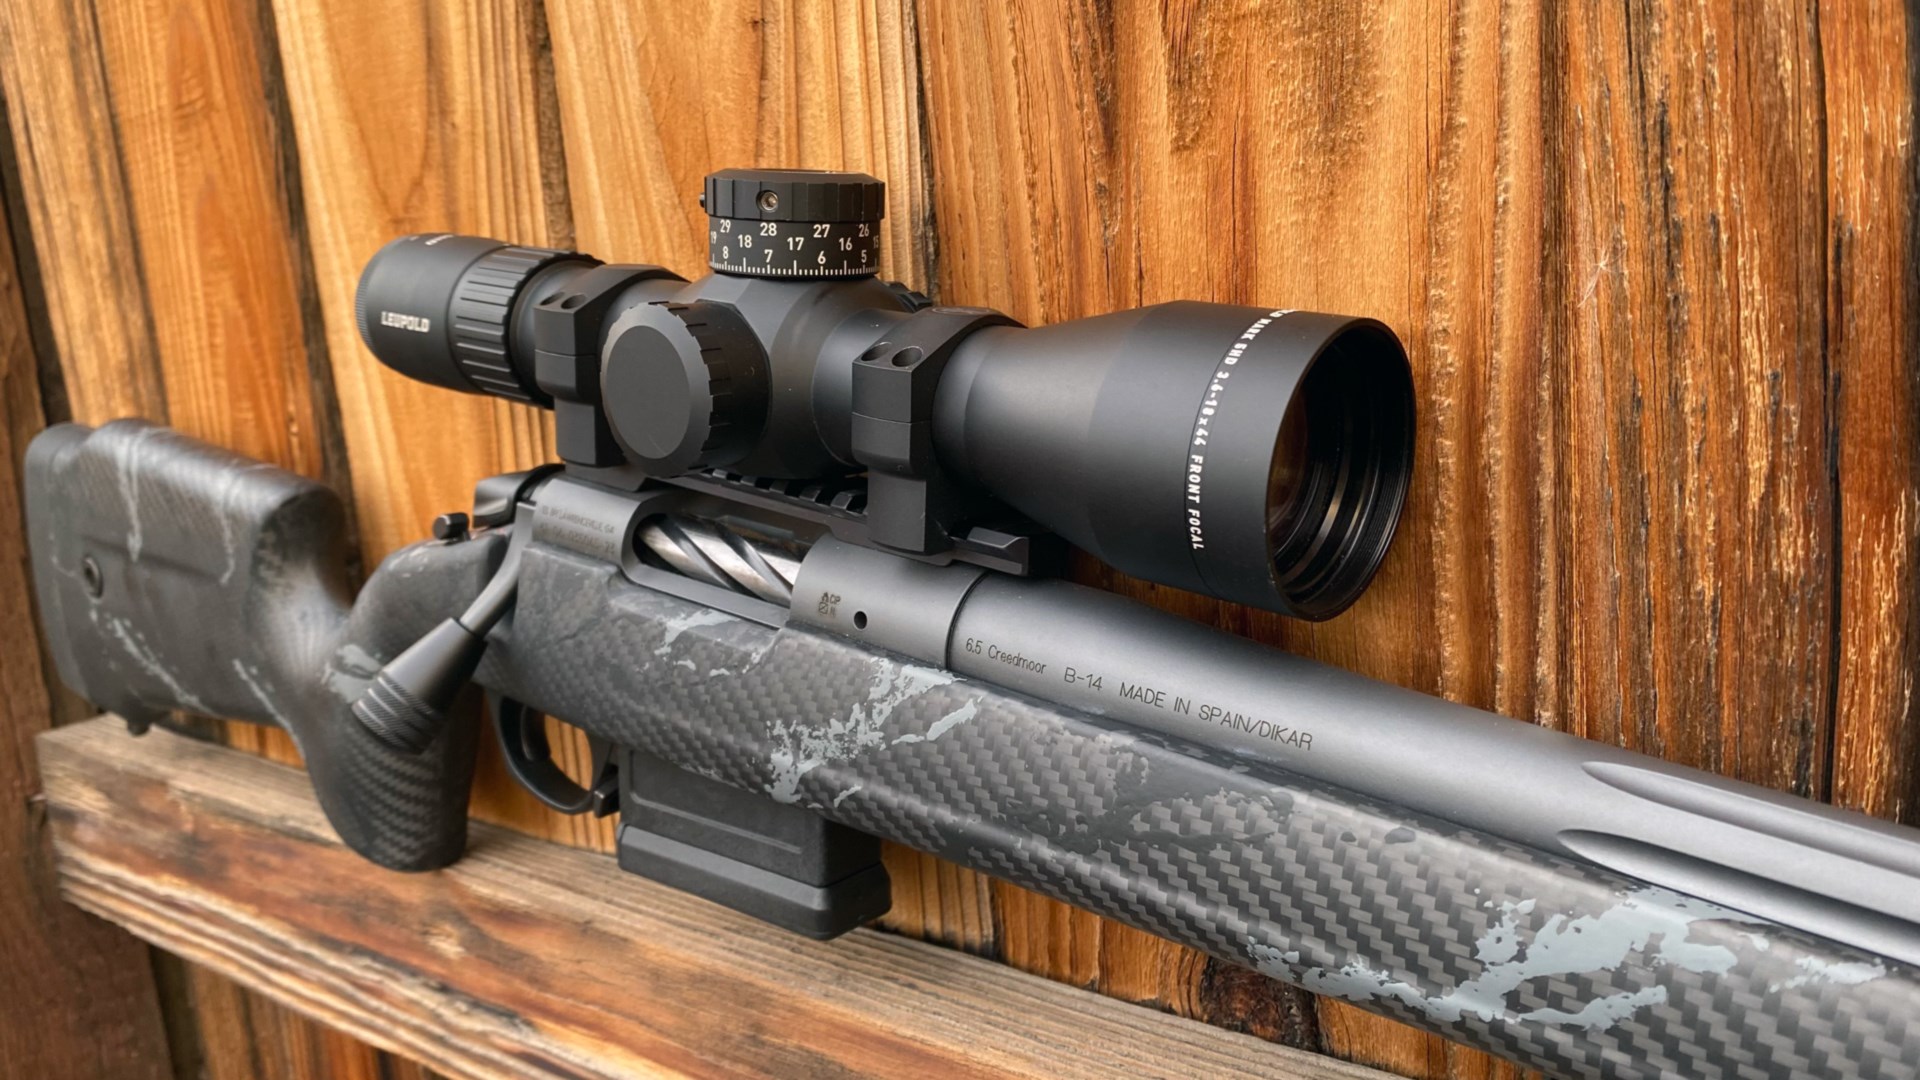 Bergara B-14 Squared Crest bolt-action rifle shown on fence with Leupold riflescope optic attached